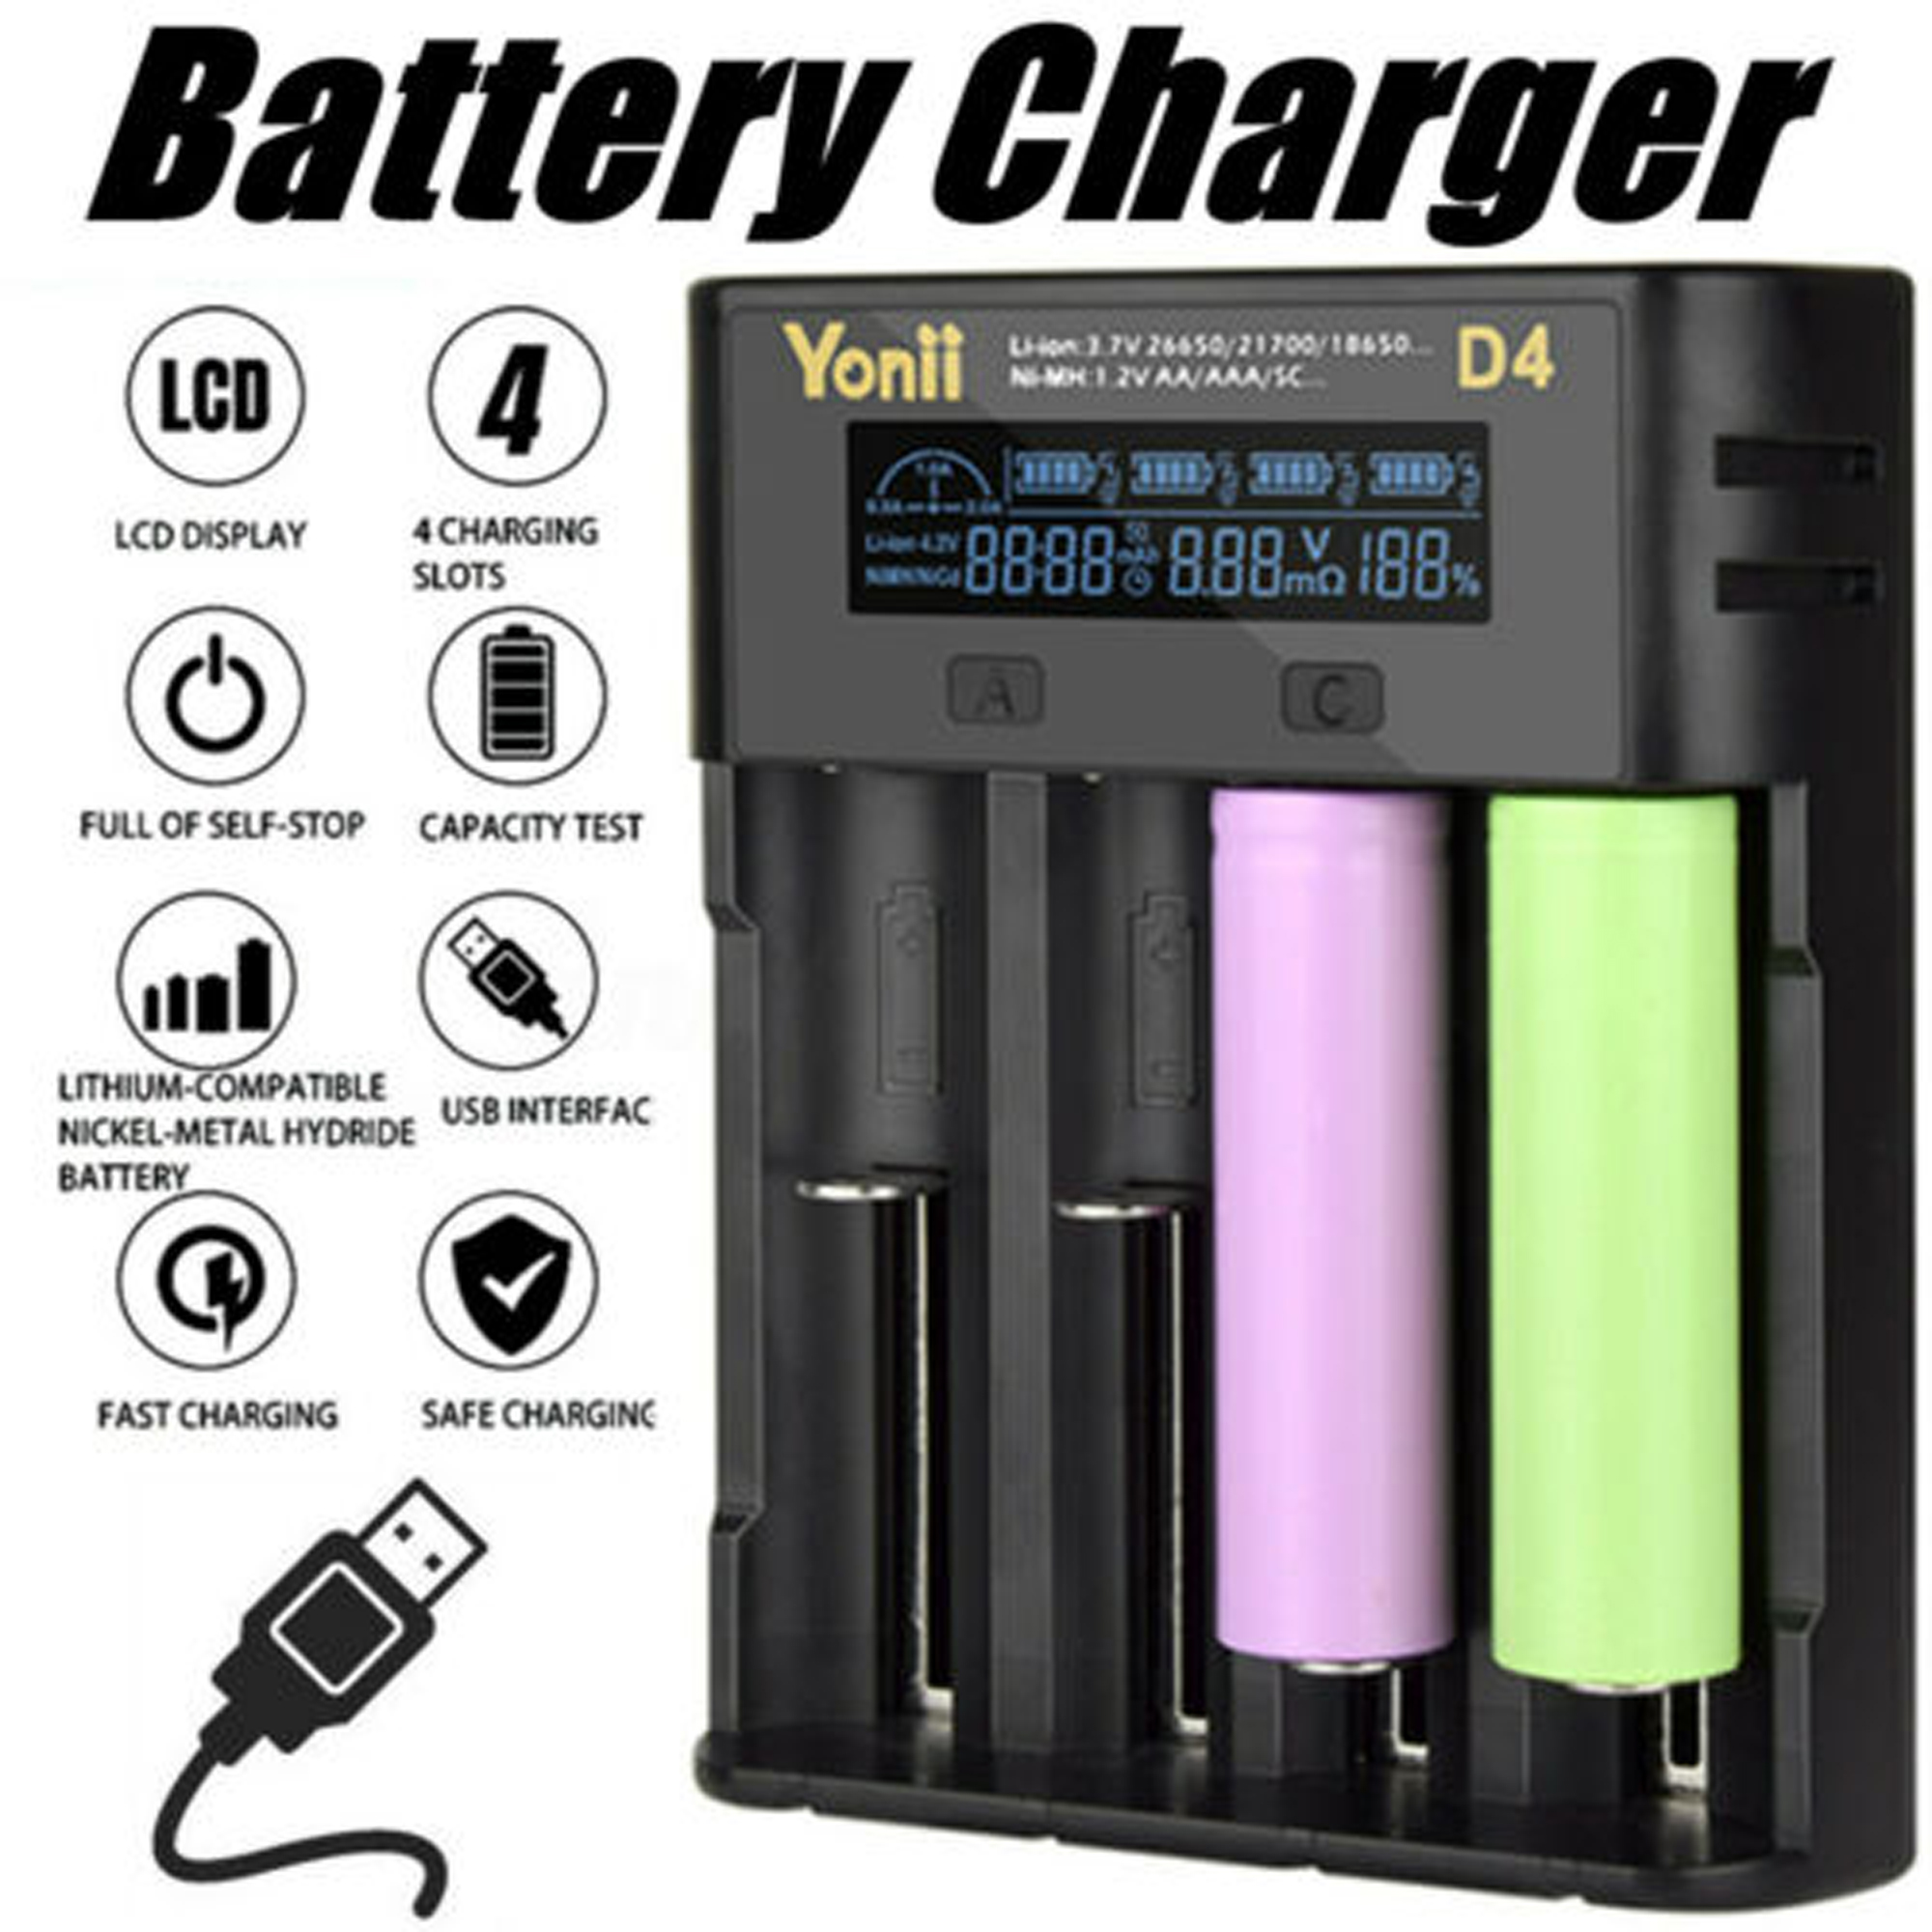 For Yonii Lcd Charger 4 Slot Lithium Battery Nimh Ebay